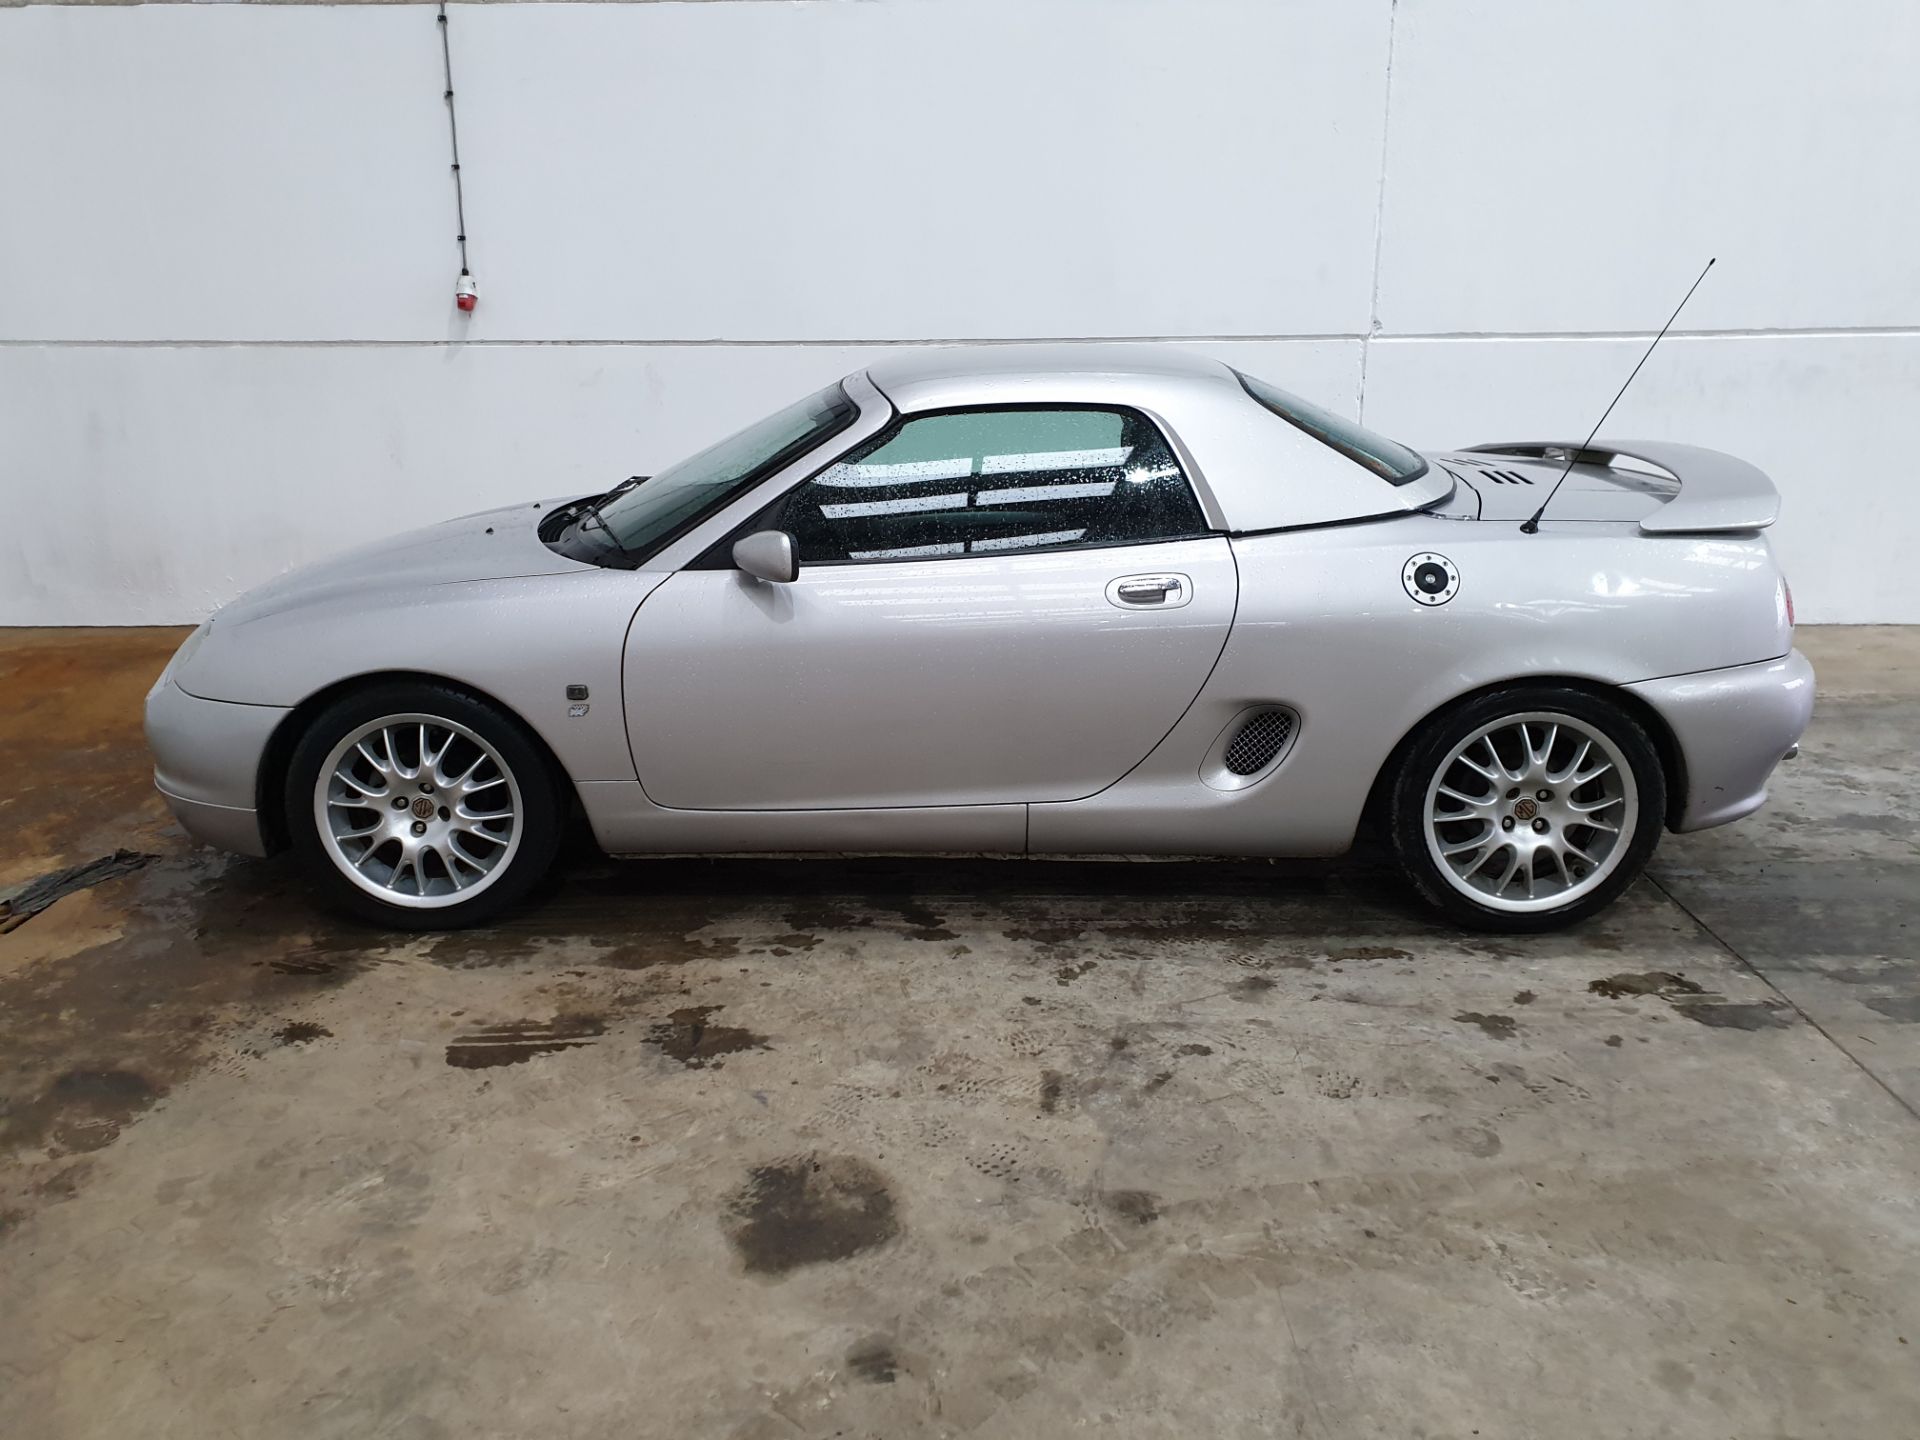 MG MGF Freestyle StepSpeed - Image 6 of 11